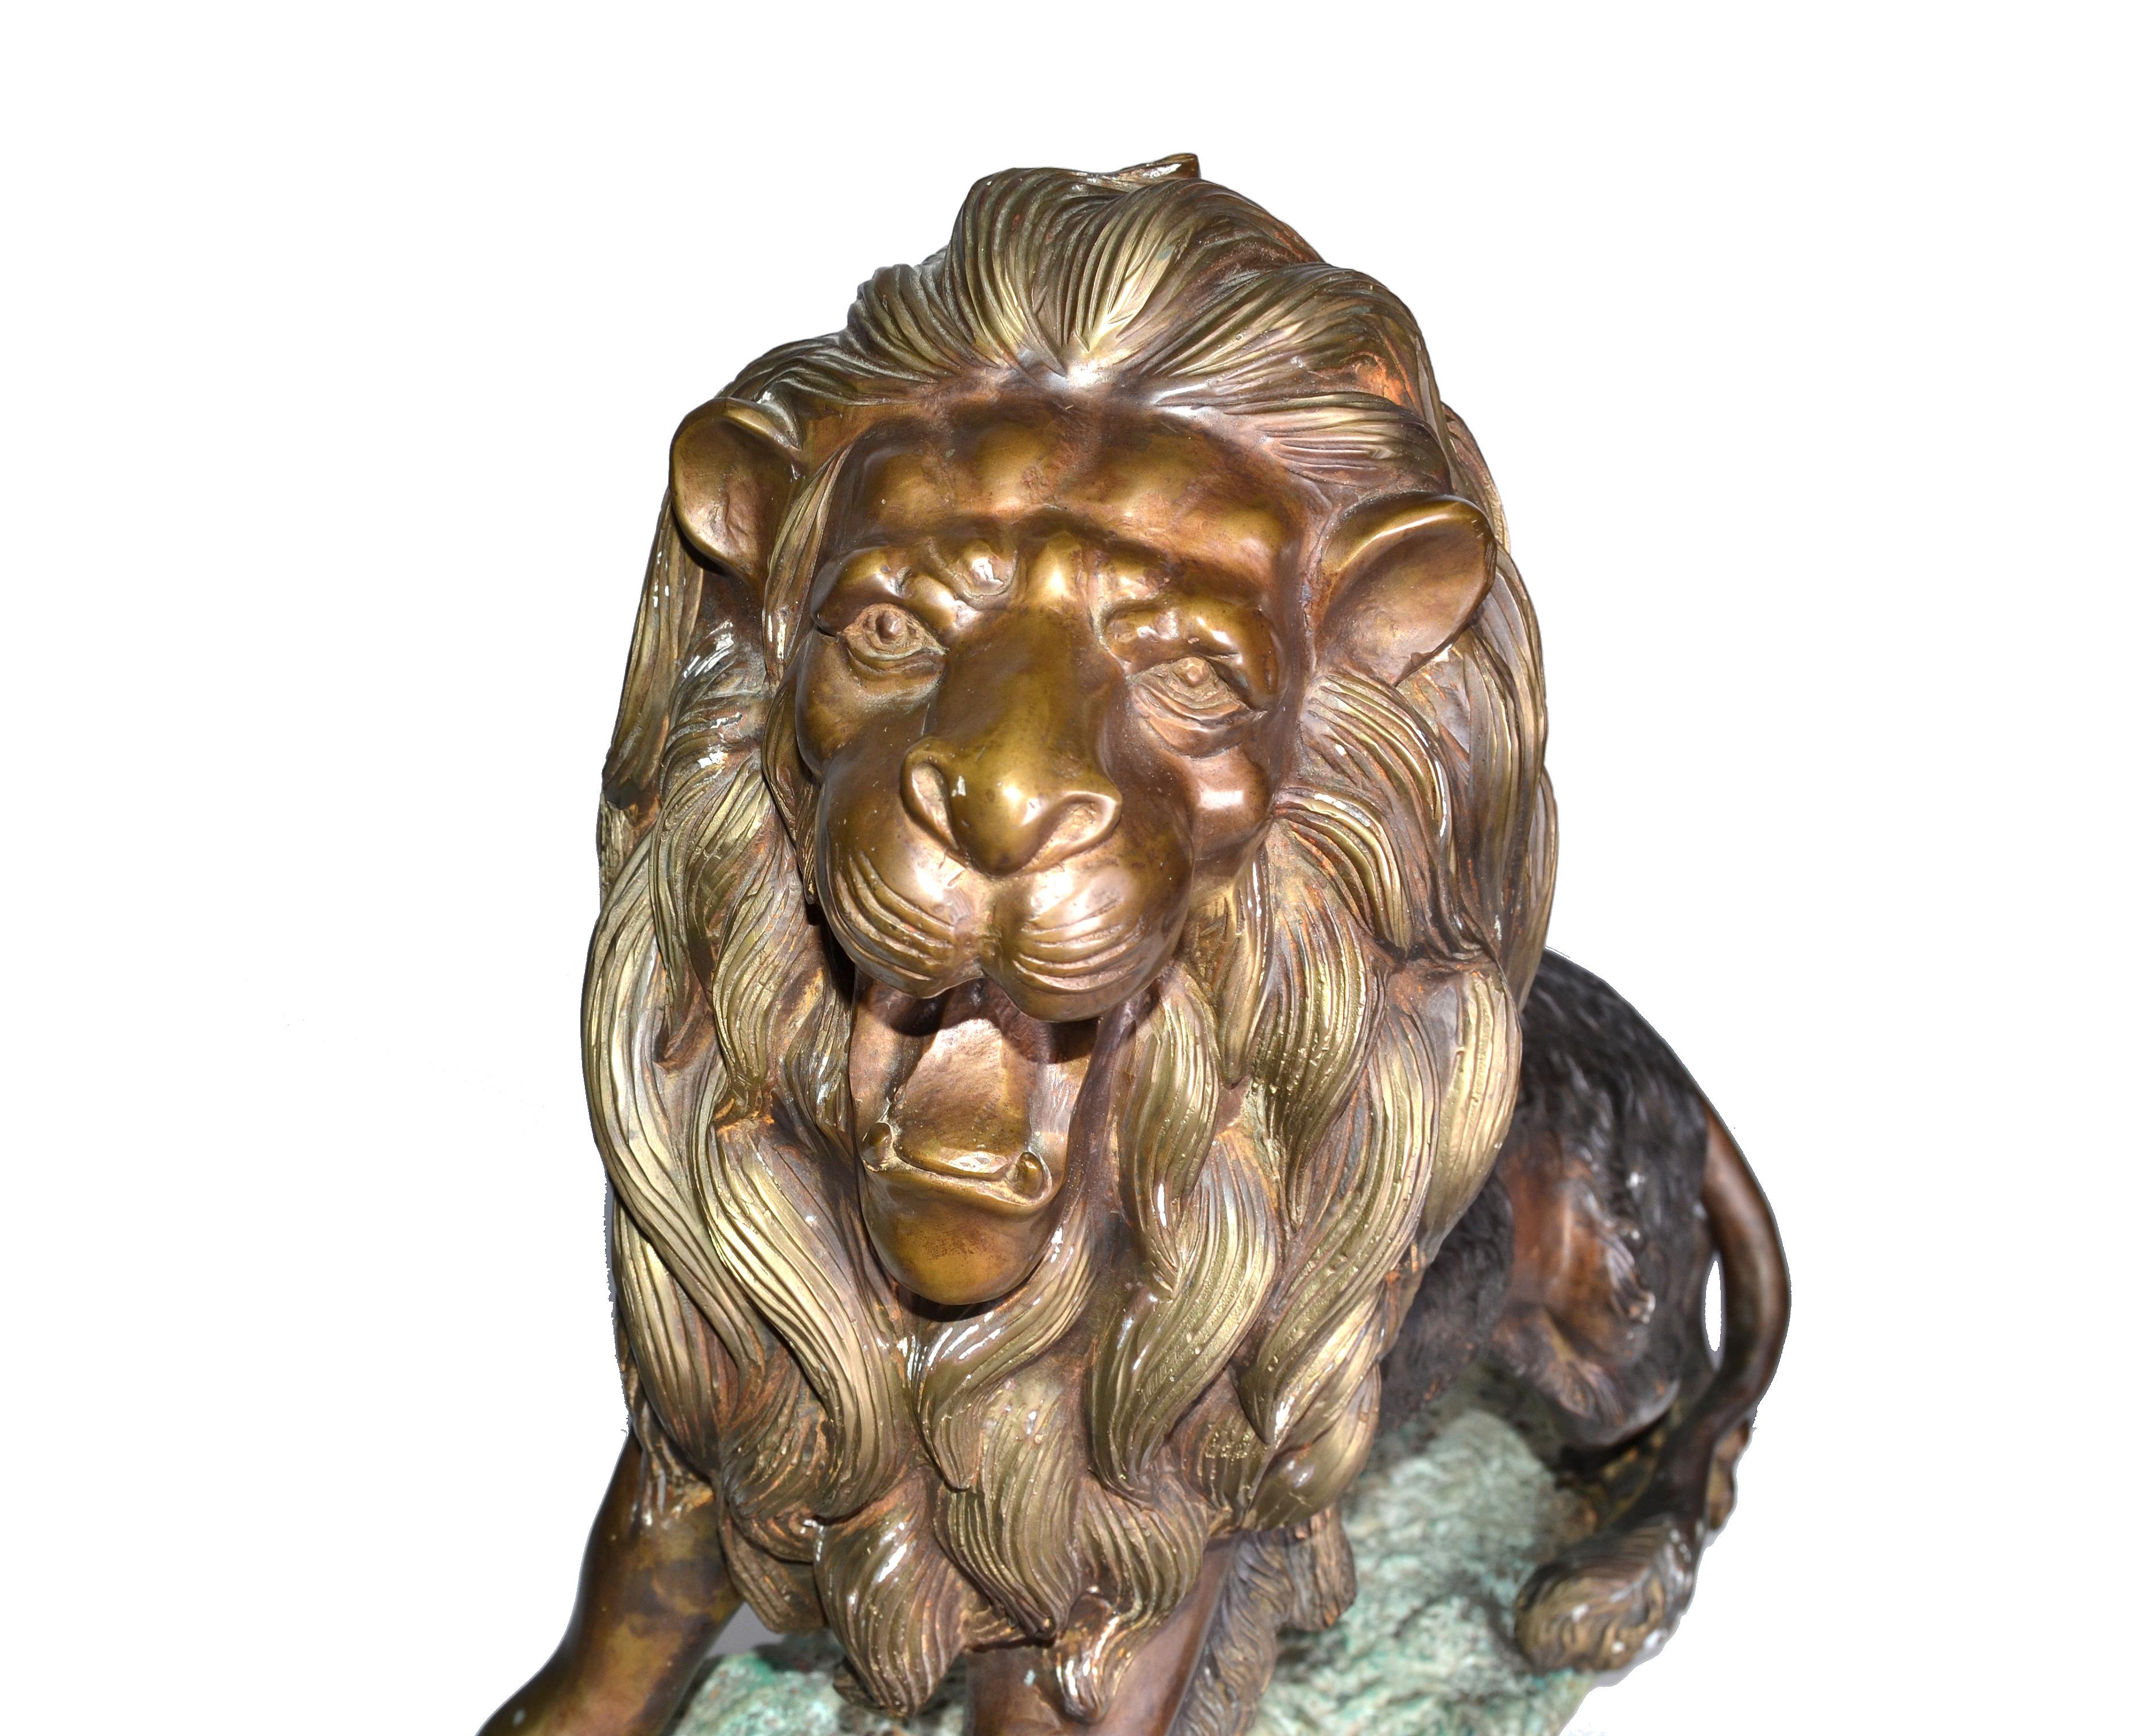 Neoclassic French large and very heavy solid bronze lion on a marble base.
No markings.
Very detailed and lovely made.